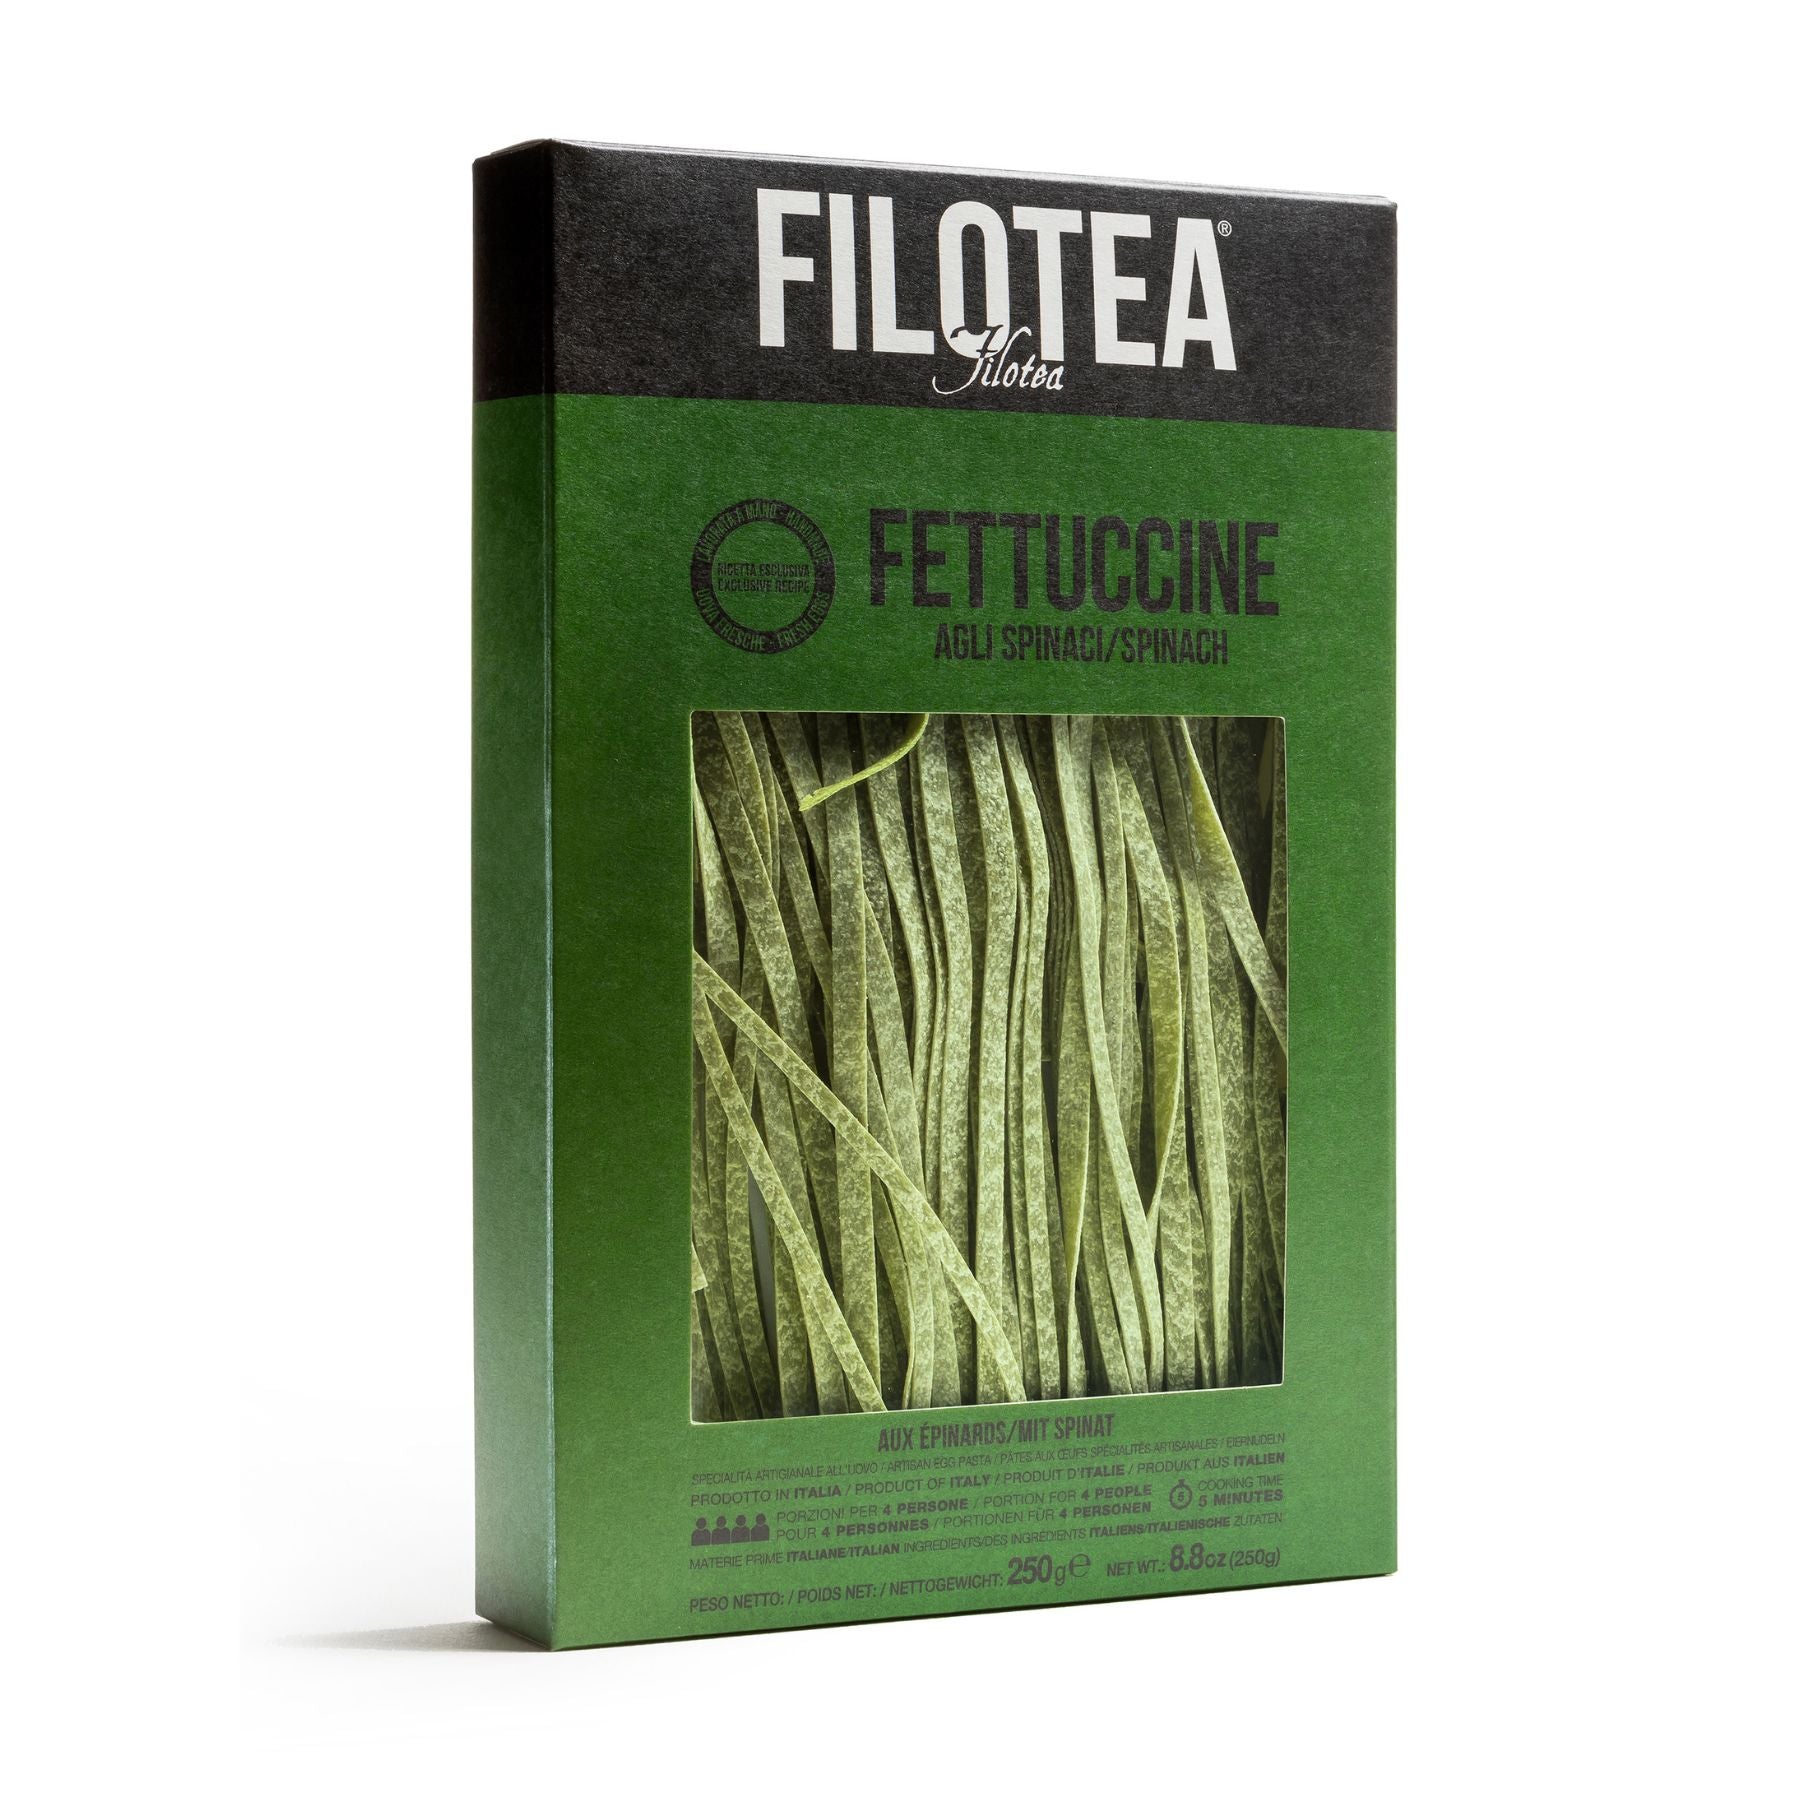 Filotea Spinach Fettuccine 250g | Imported and distributed in the UK by Just Gourmet Foods